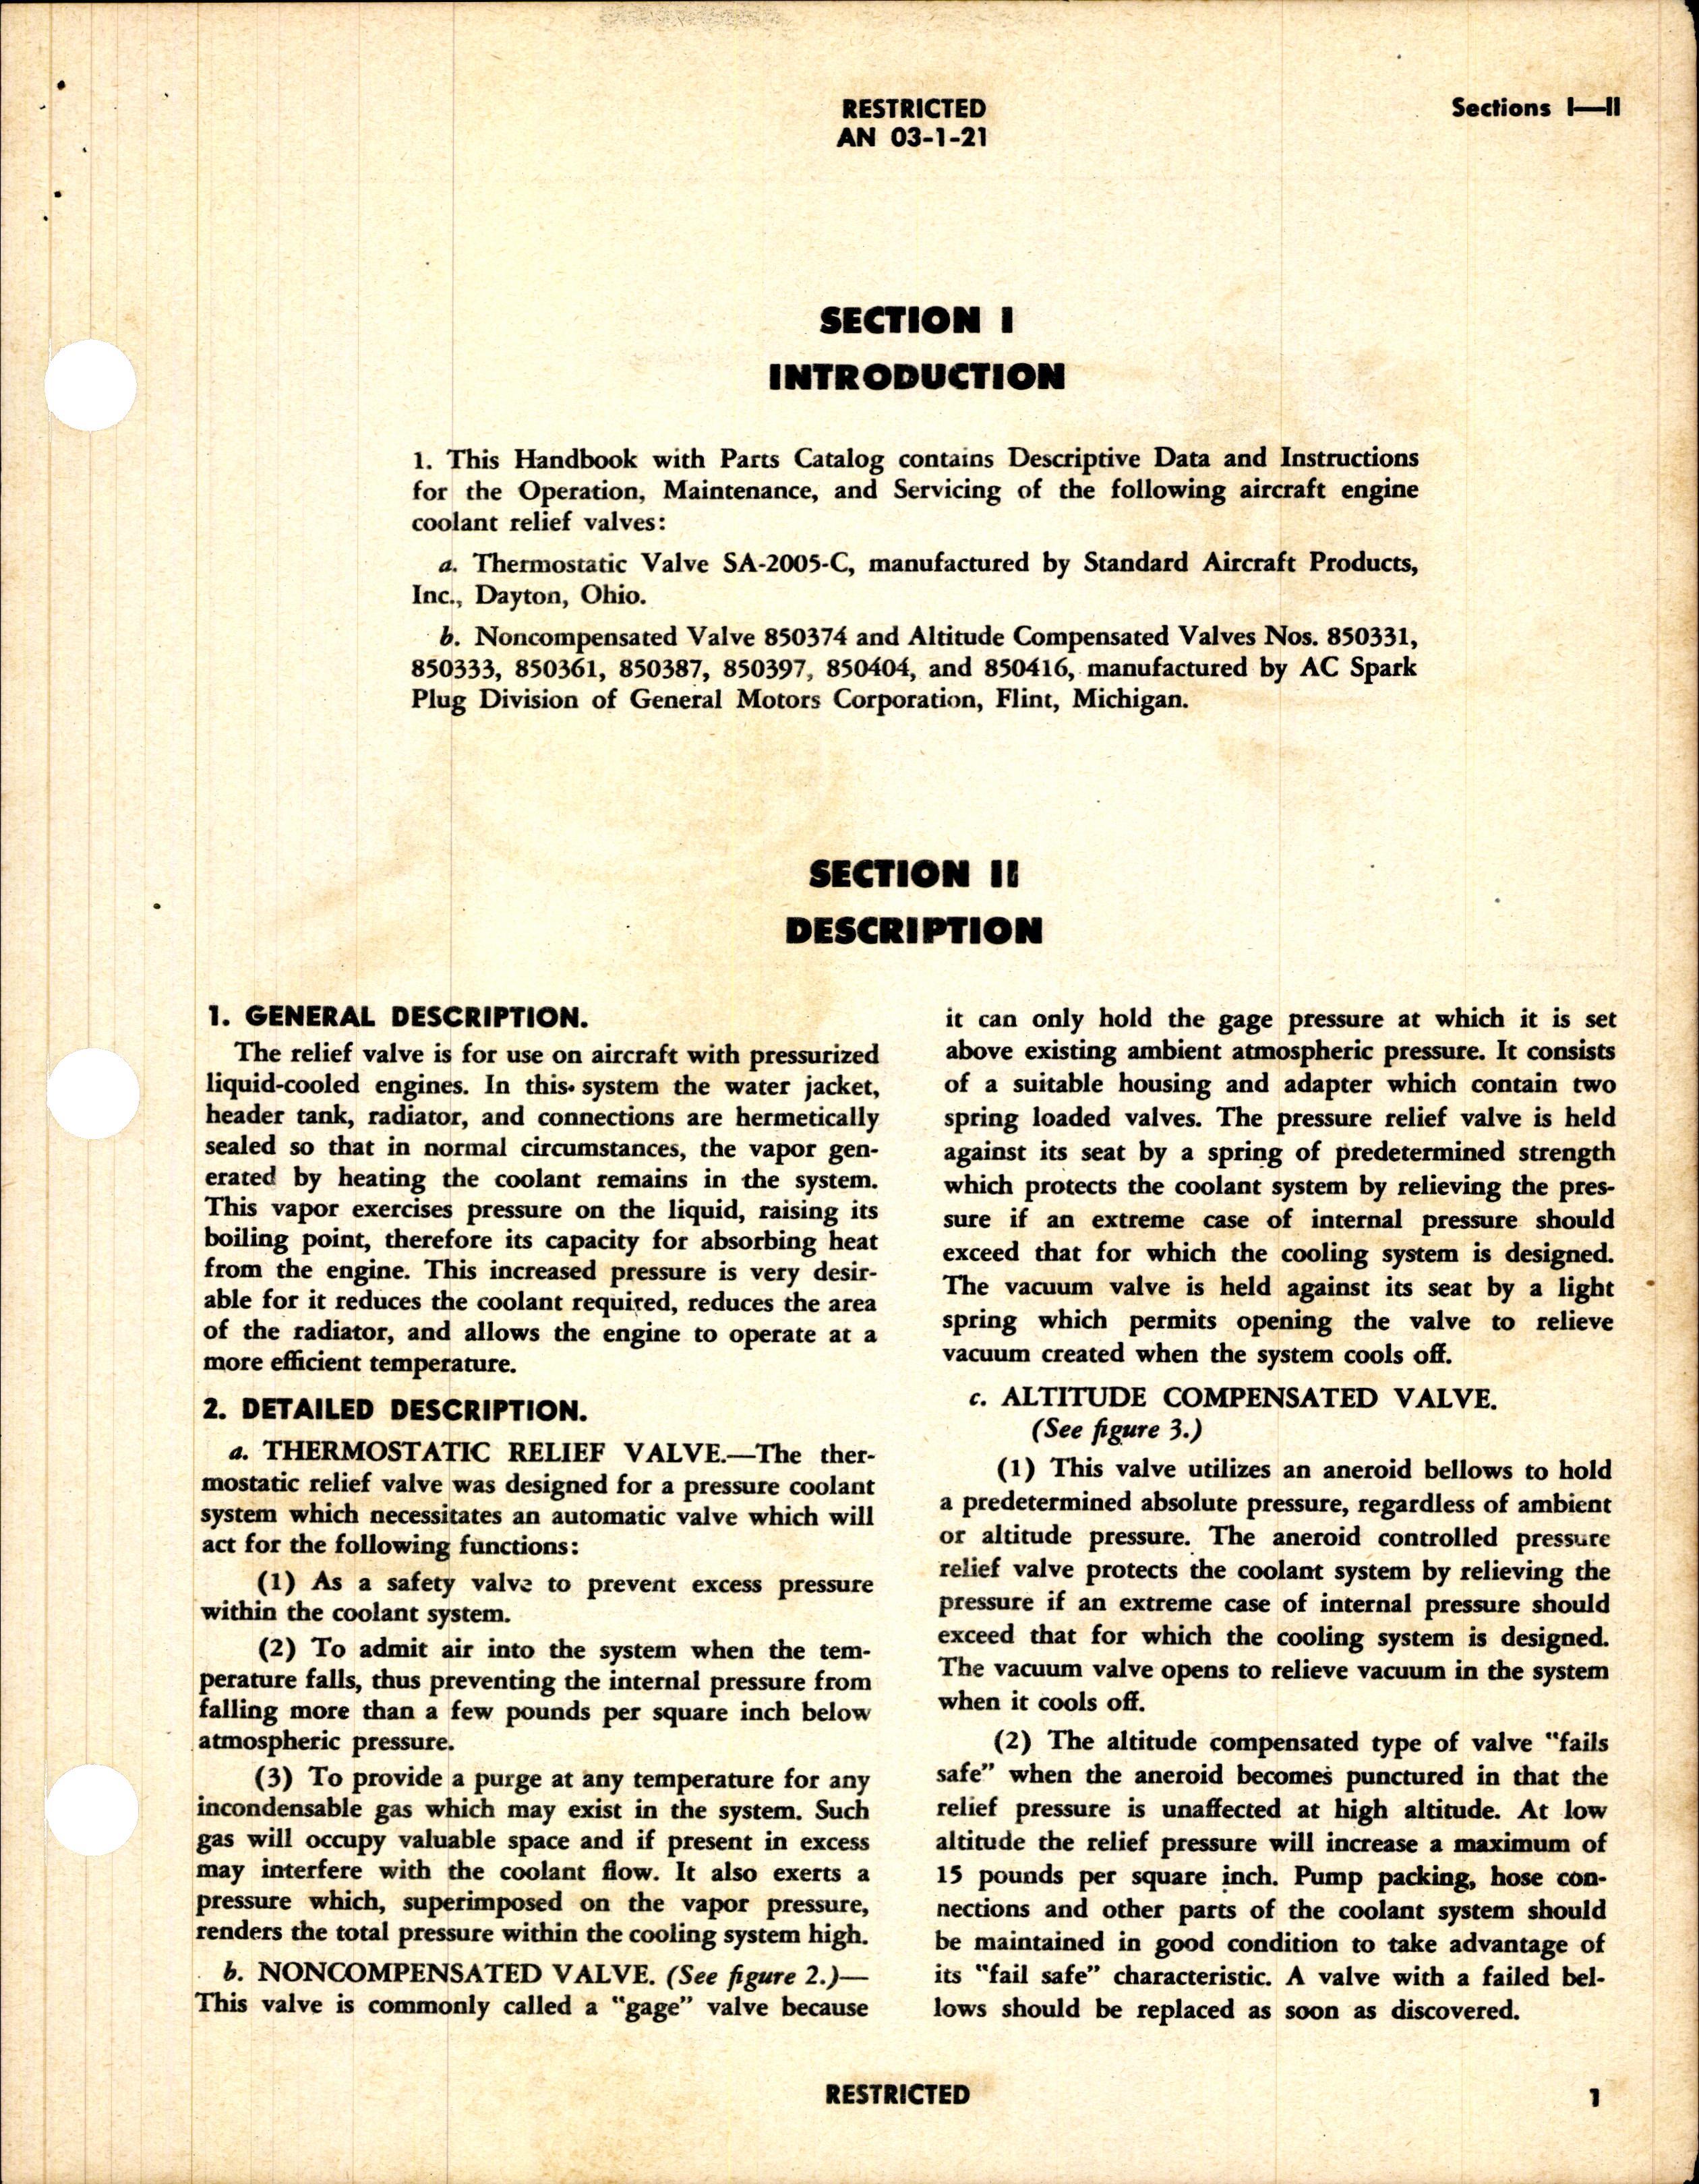 Sample page 5 from AirCorps Library document: Operation, Service, & Overhaul Instructions with Parts Catalog for Coolant Relief Valves